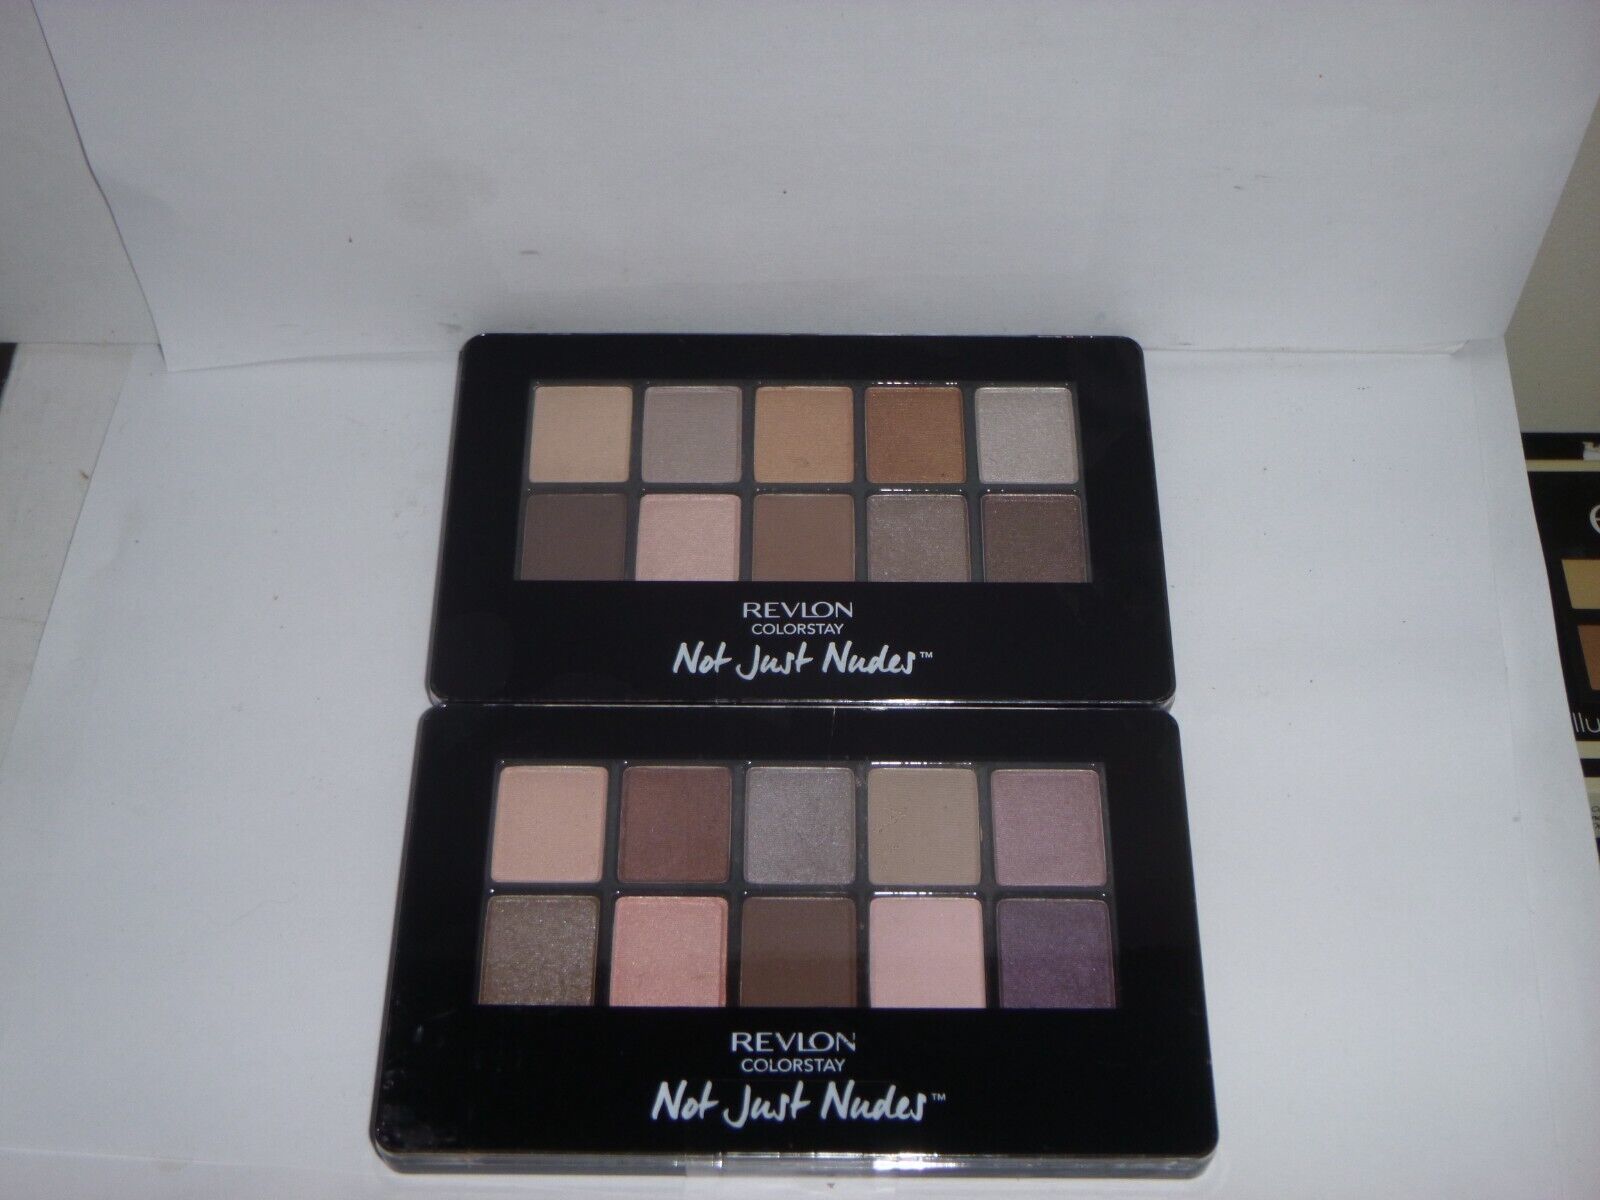 Primary image for (1) Revlon Colorstay Not Just Nudes 10-Pan Eye Shadow Palette ~ Choose Shade